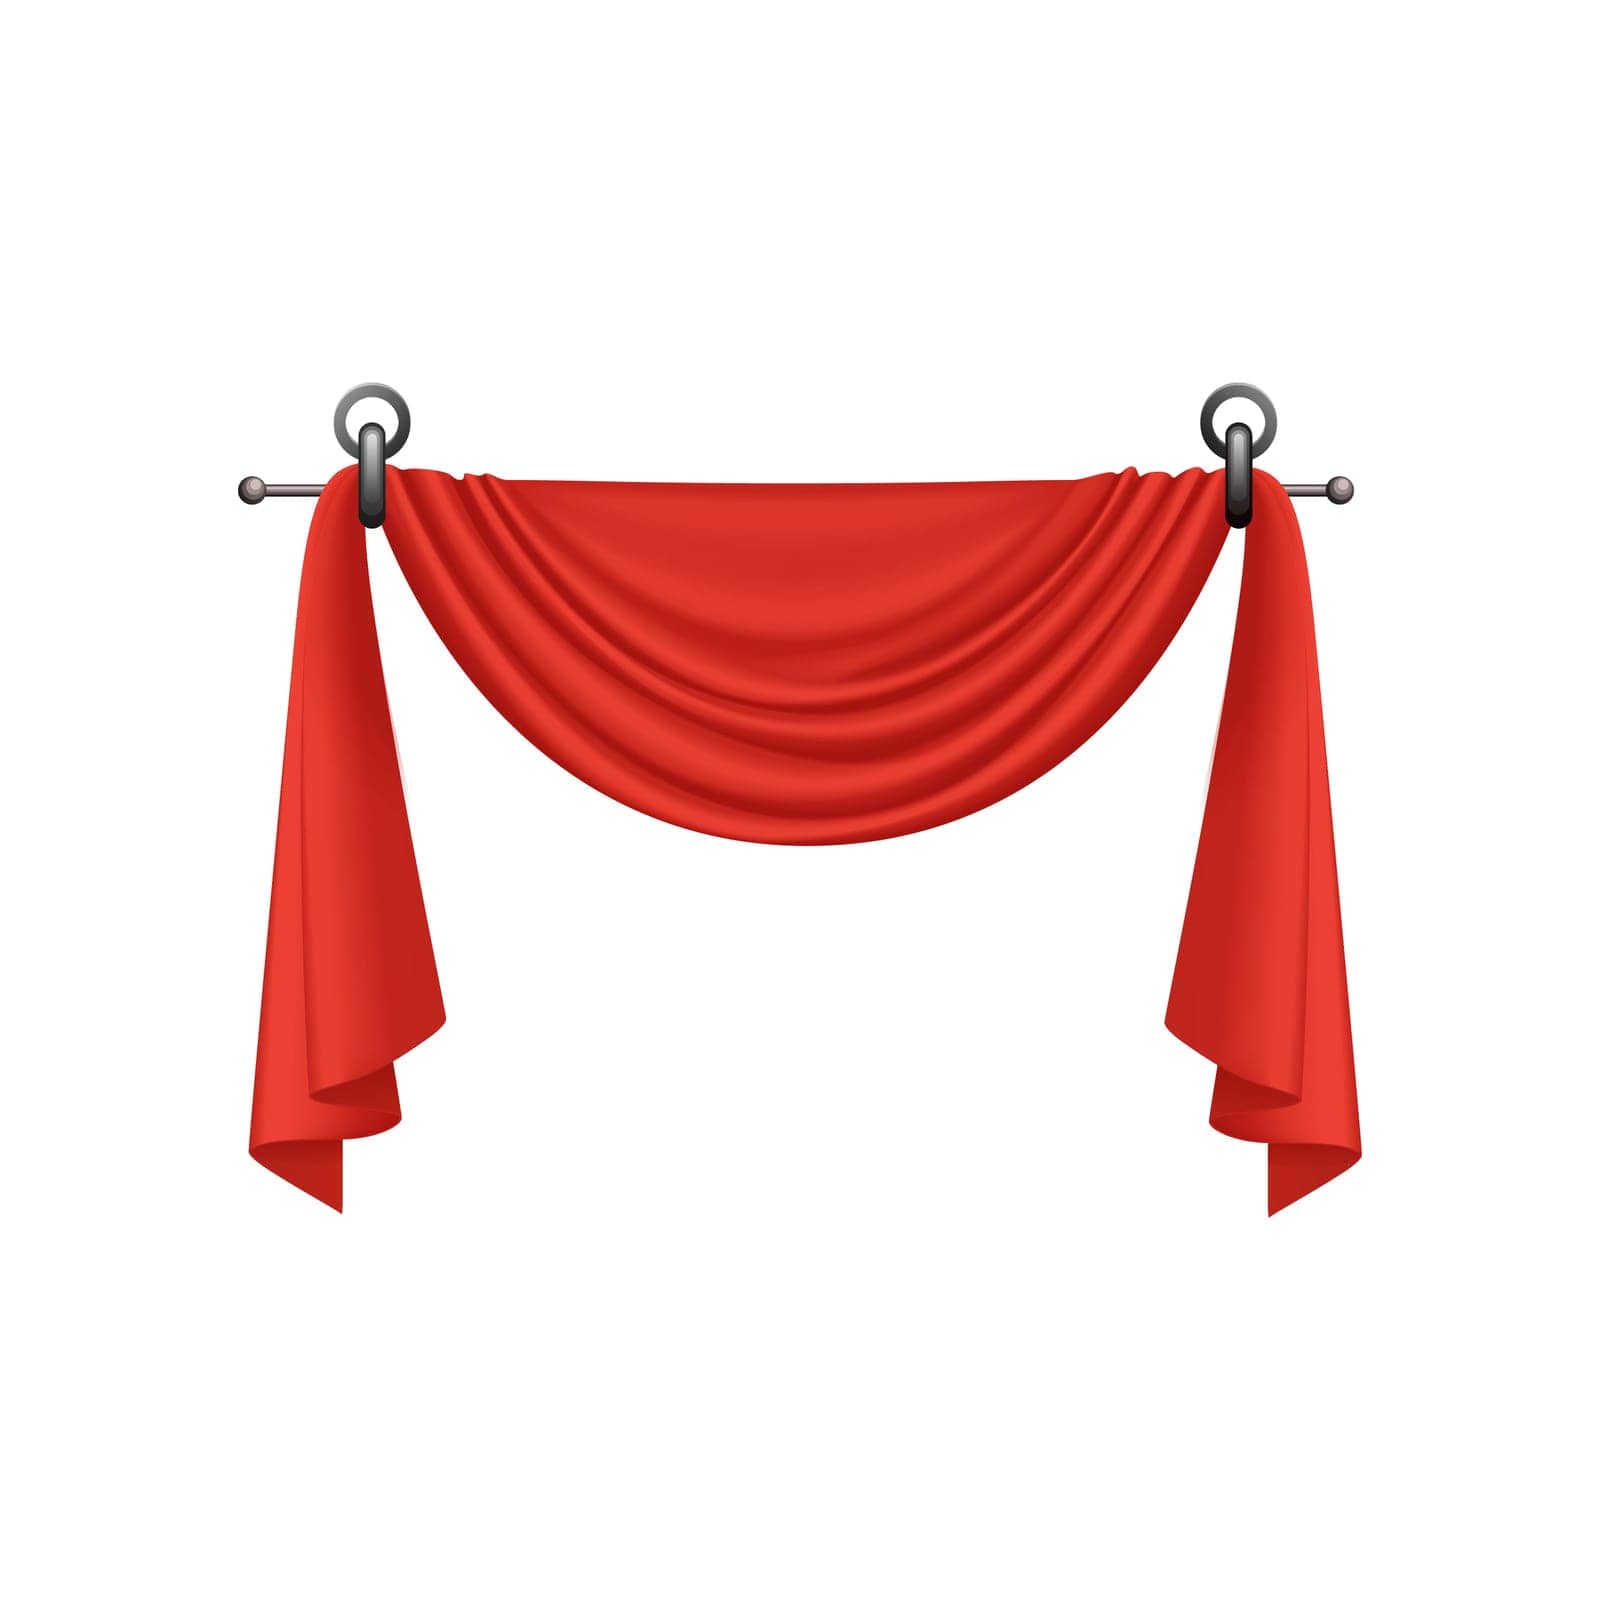 3D red curtains with drapery and decorative rings on pipe cornice vector illustration